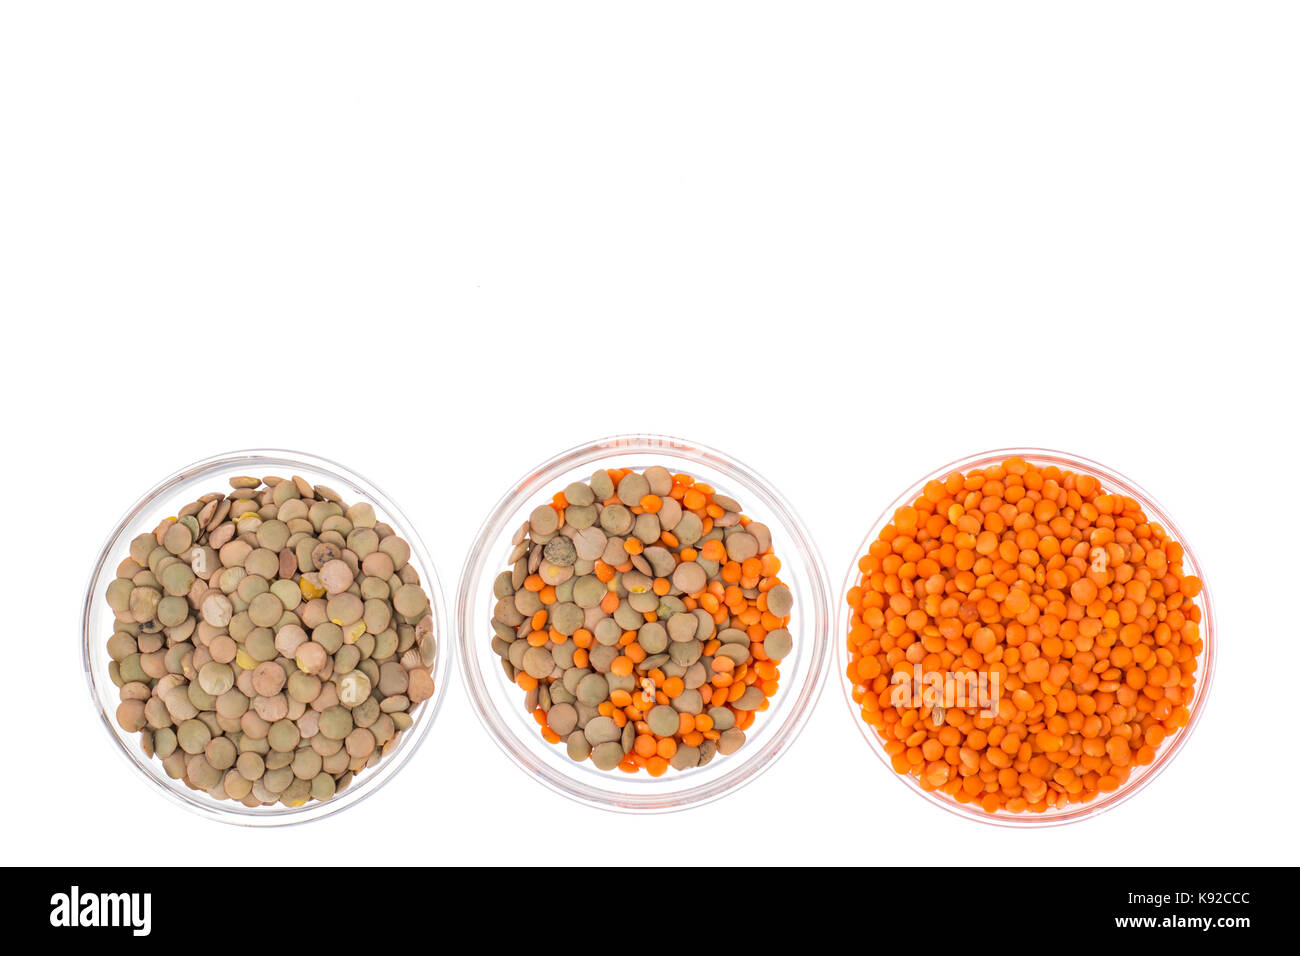 Chickpeas, orange lentils in and green, isolated on white. Studio Photo Stock Photo